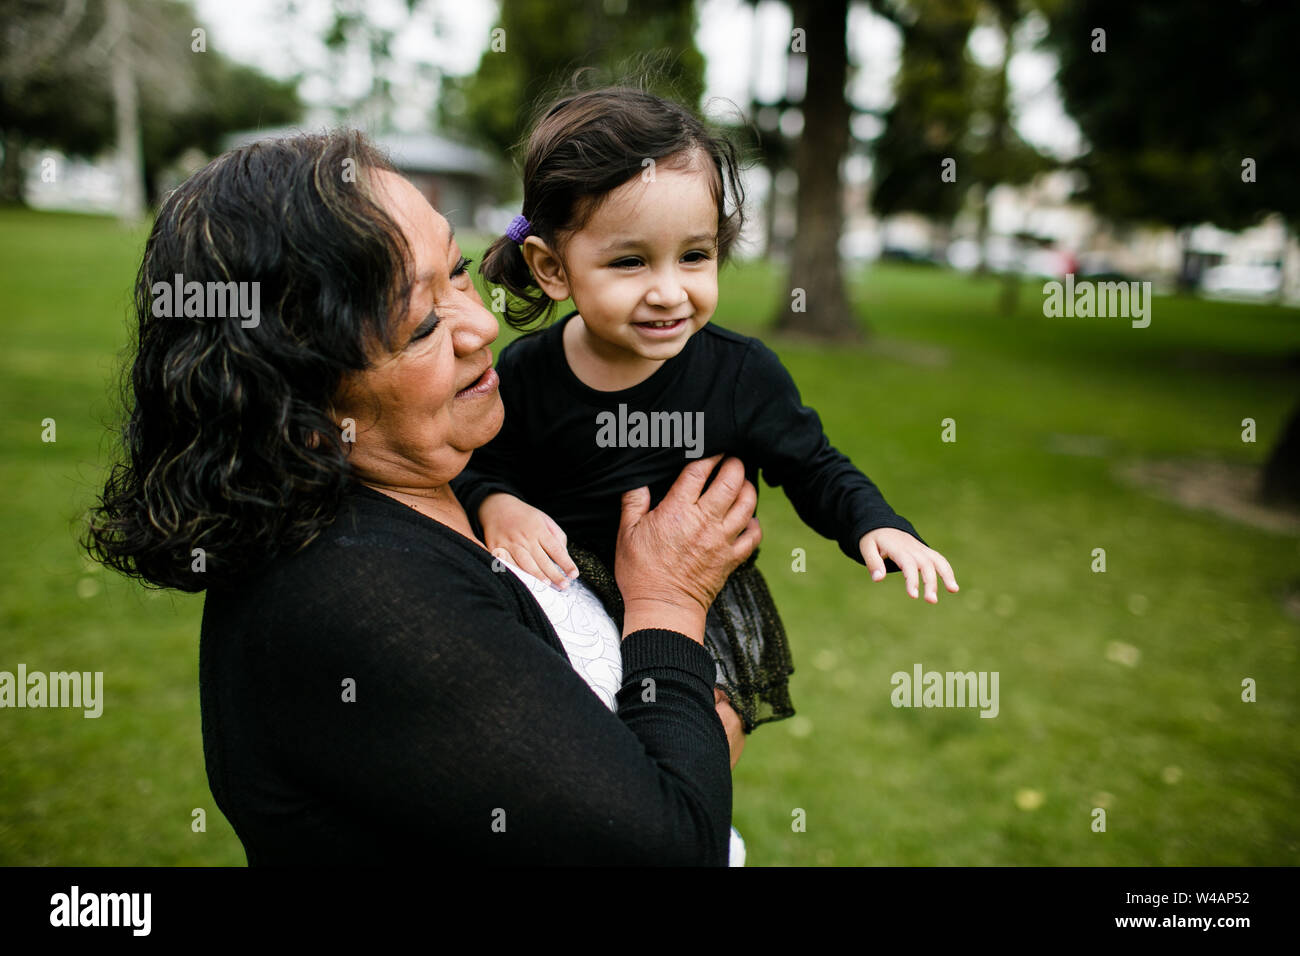 Grandmother & granddaughter smiling and hugging in park Stock Photo